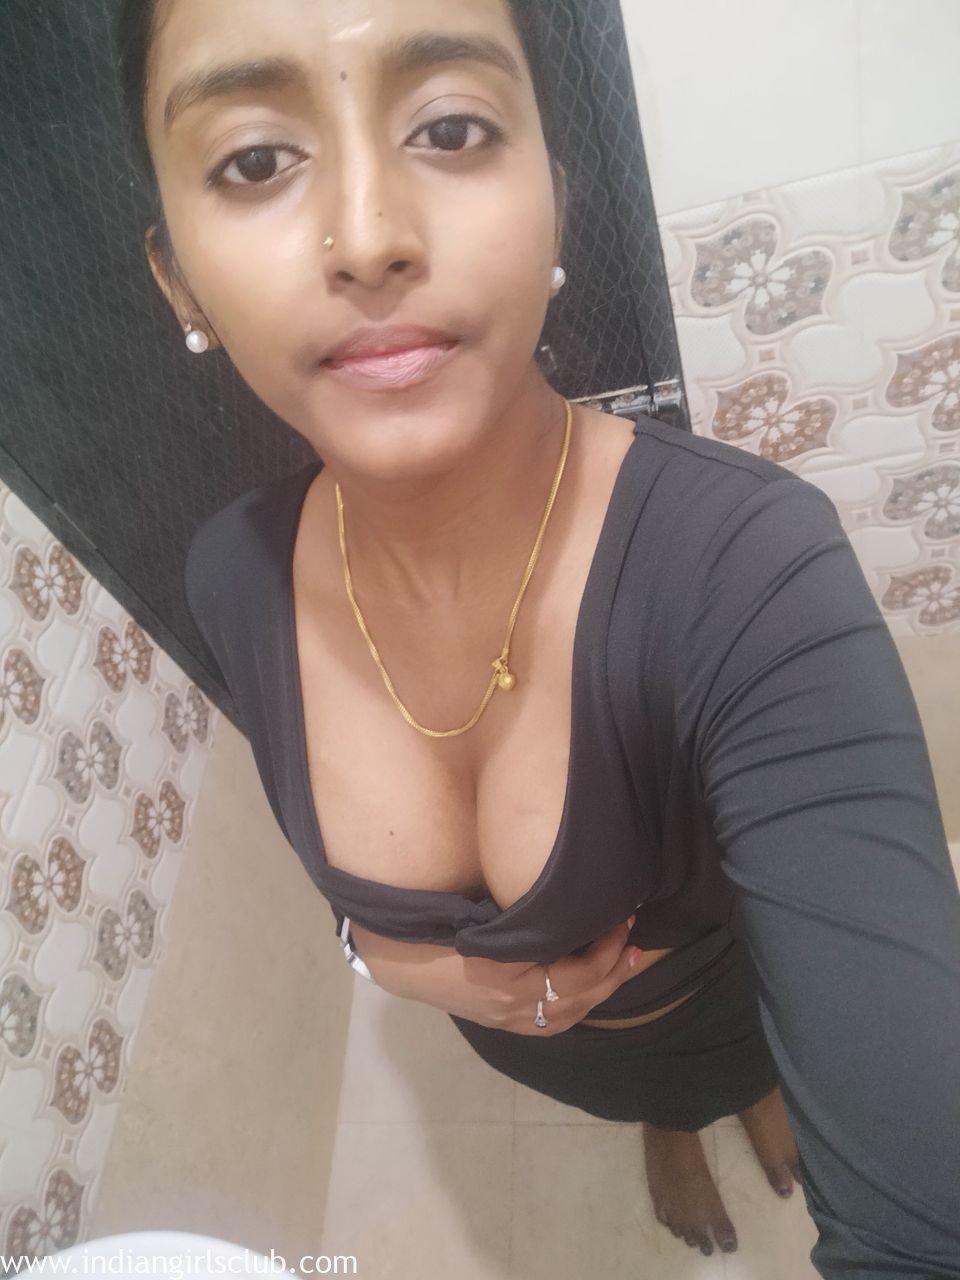 Tamil College Girl Nice Firm Soft Big Boobs image